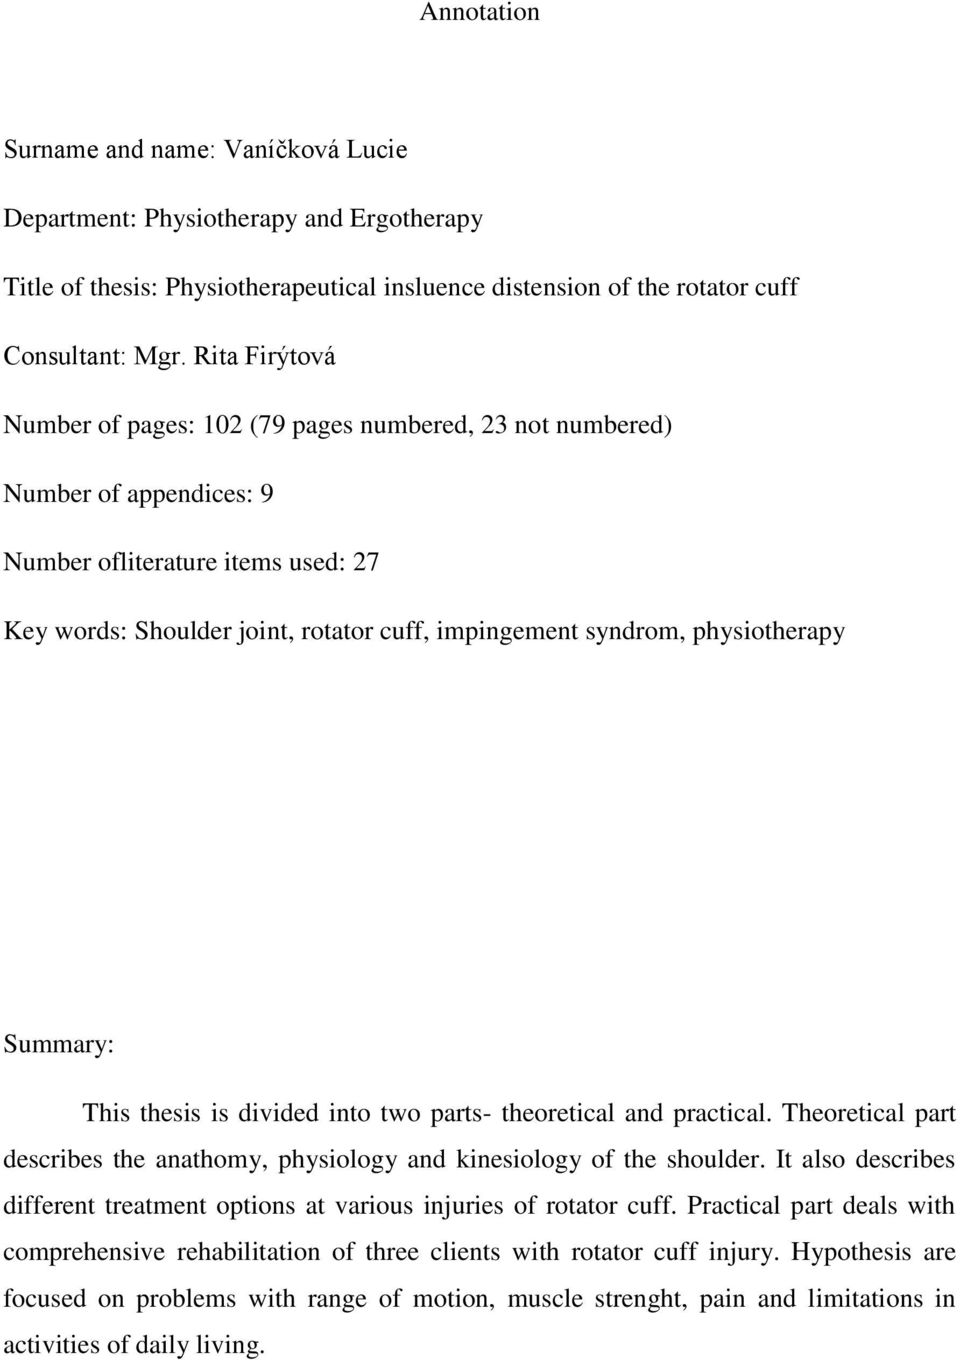 physiotherapy Summary: This thesis is divided into two parts- theoretical and practical. Theoretical part describes the anathomy, physiology and kinesiology of the shoulder.